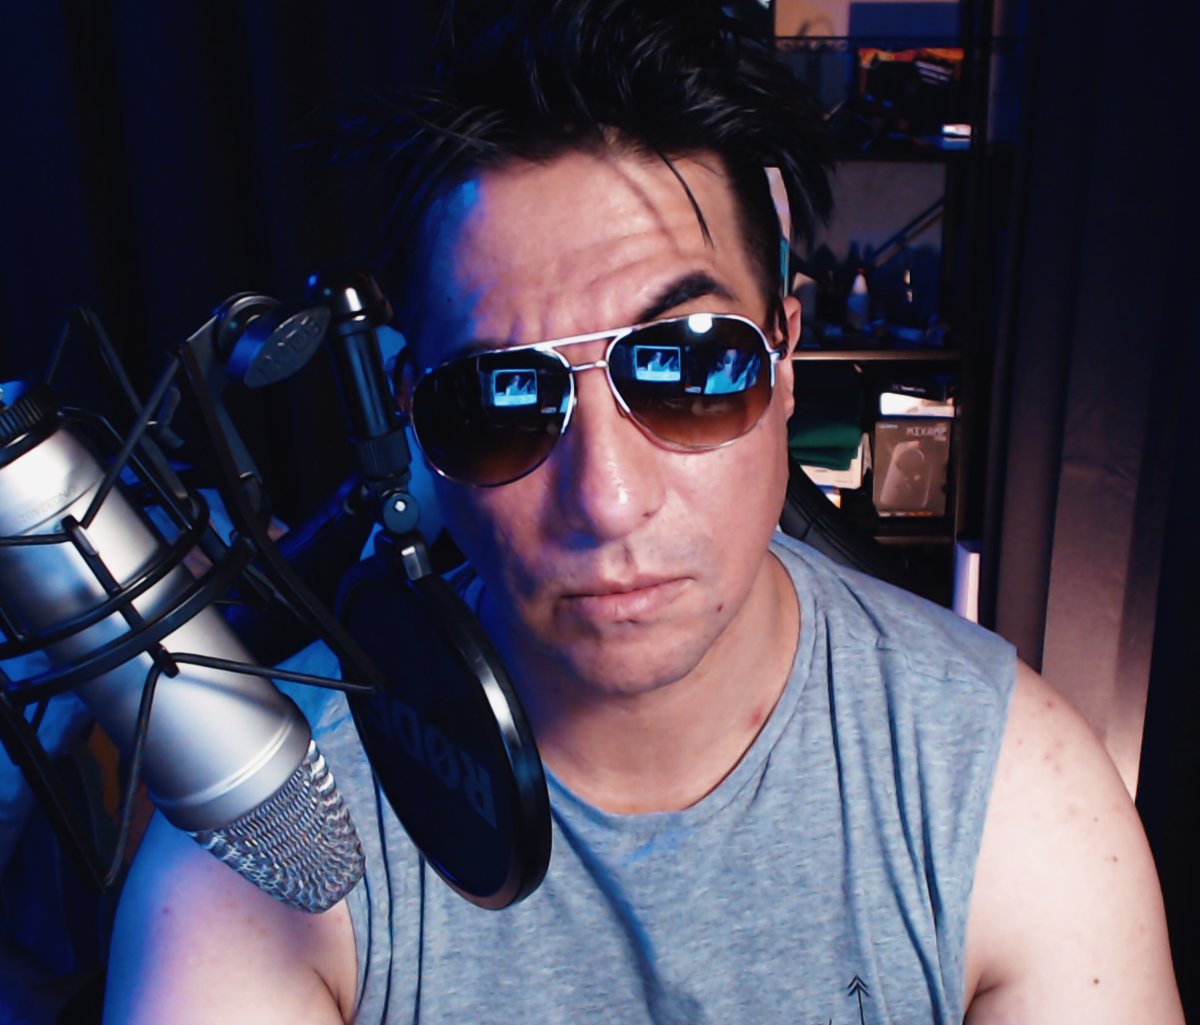 Sup Gamers? My weekly radio show will be starting up next week. Wednesdays and Thursdays afternoons on @thecheesefm NZ time from 1400 to 1700. If you have any song requests/dedications/shout-outs... send them to mikert@thecheese.co.nz #MikeOnTheMic is back #radio